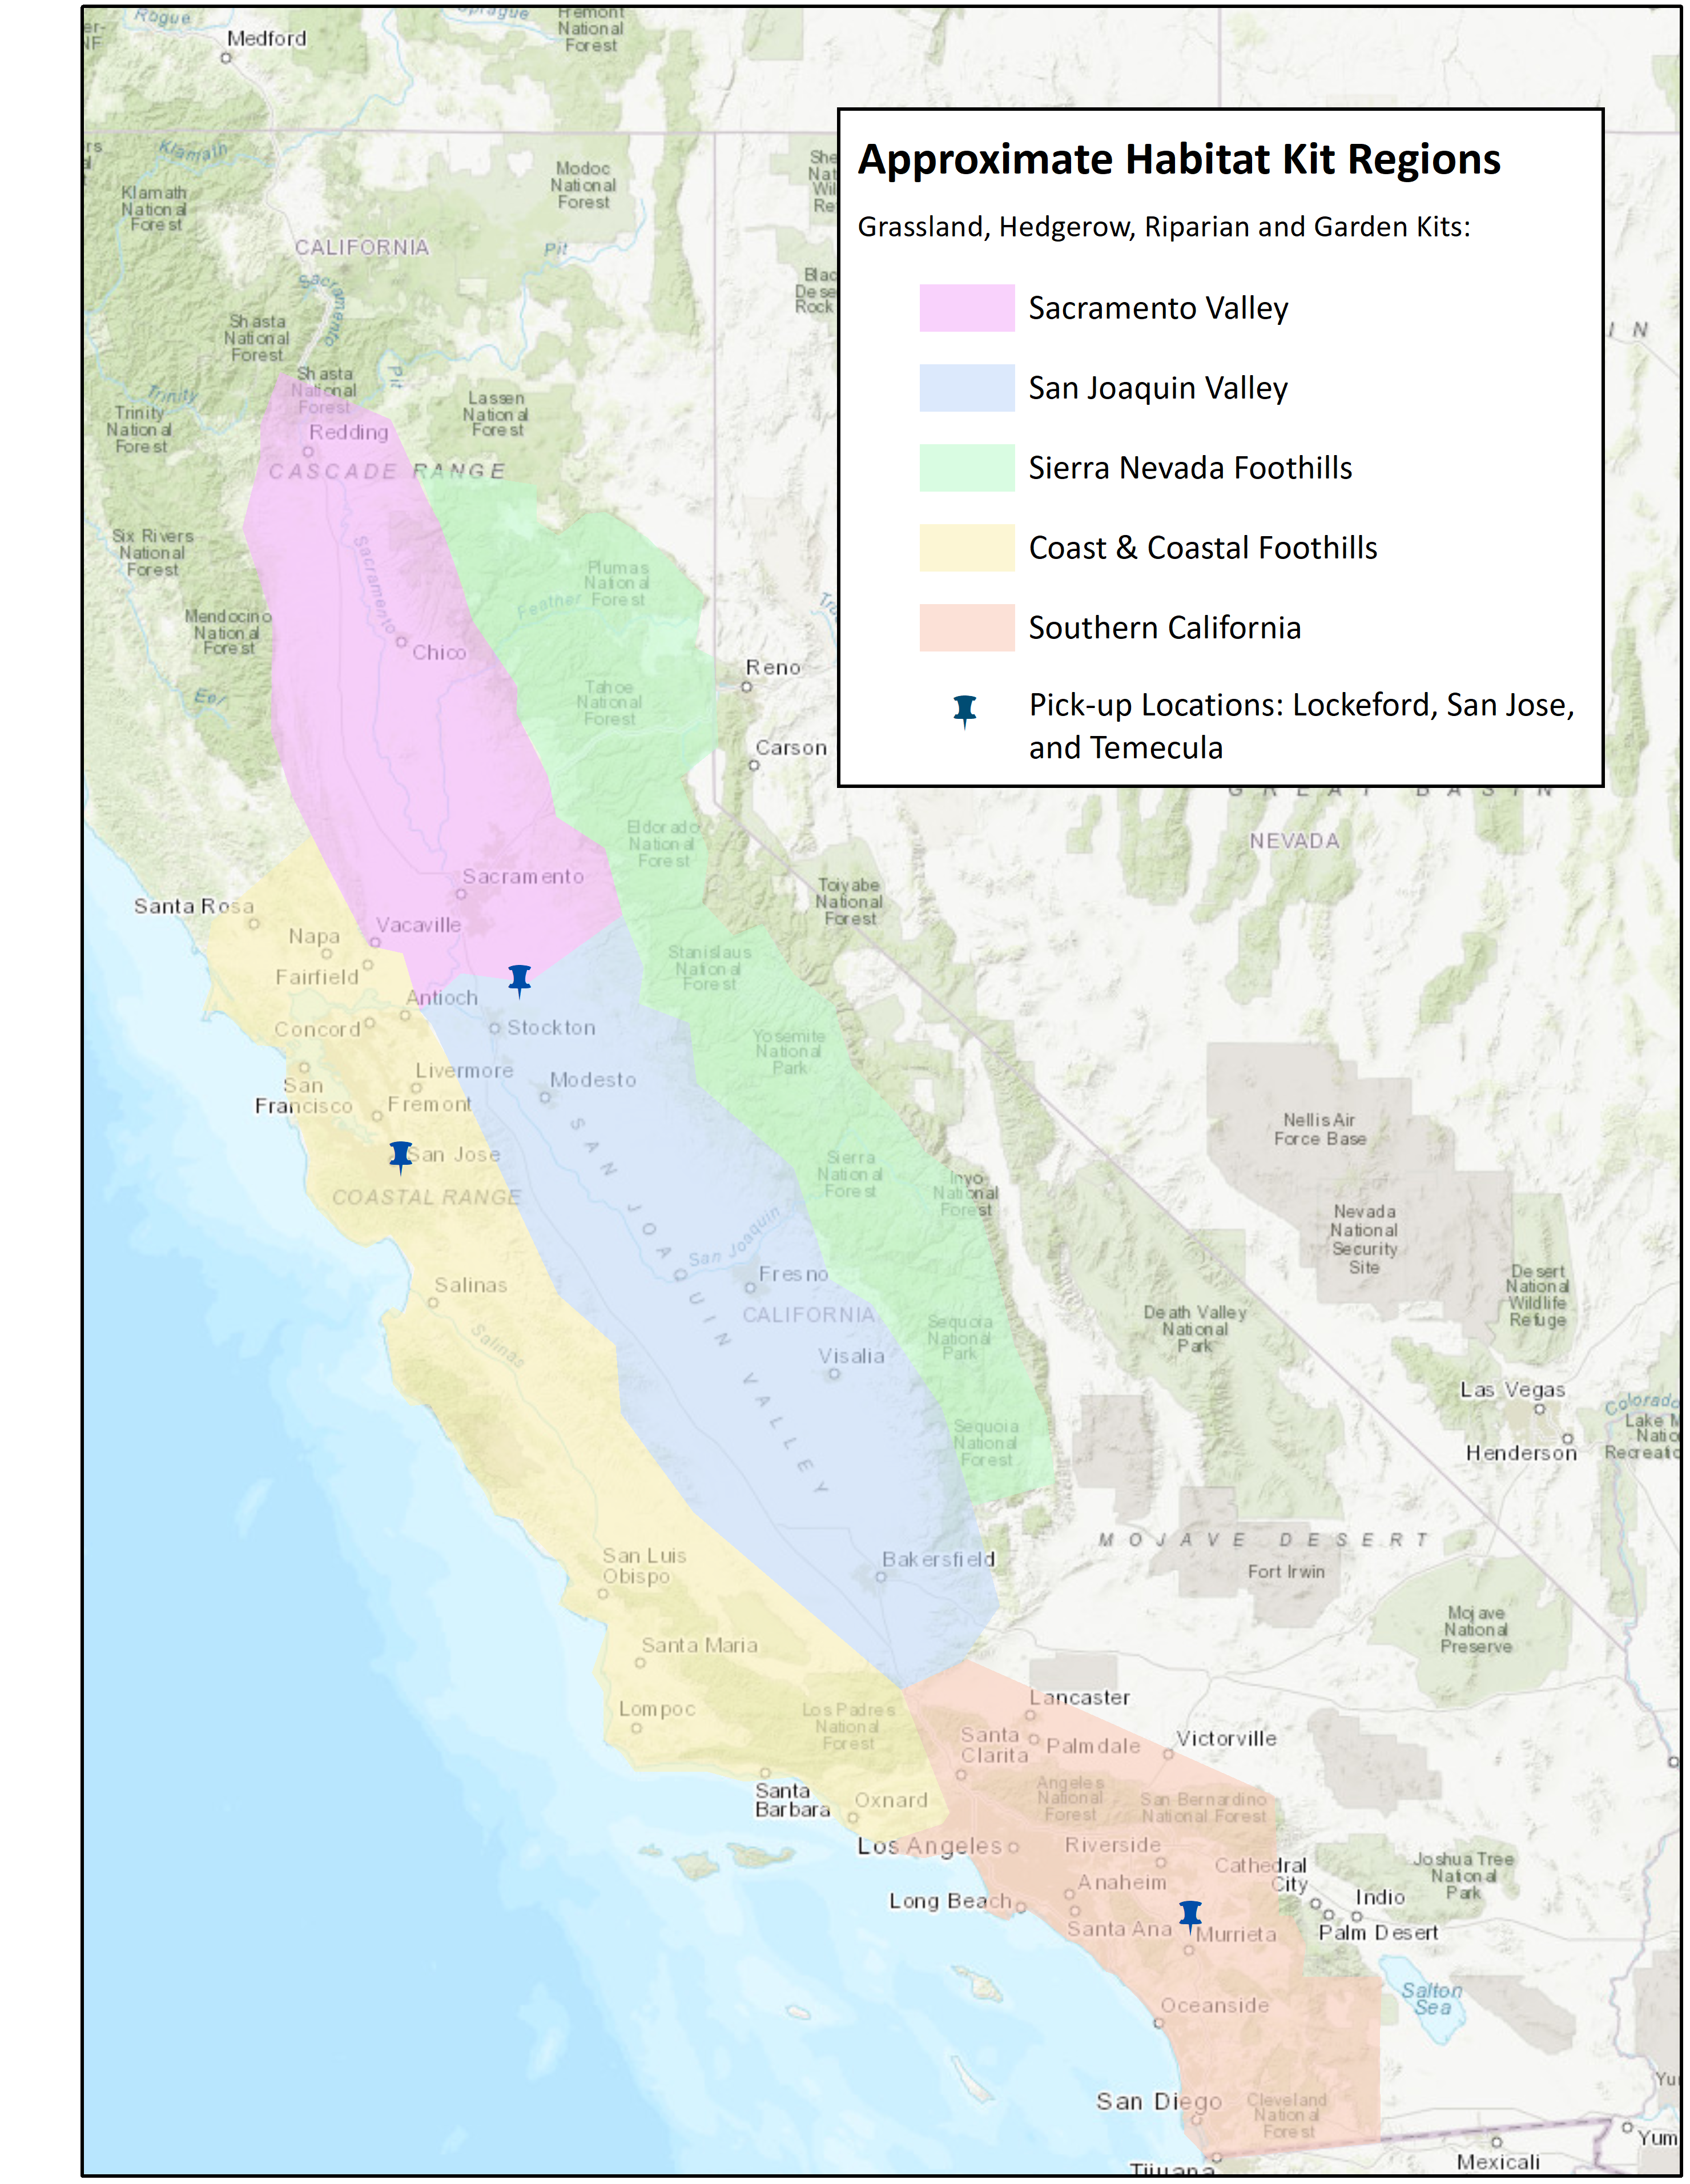 "Map of habitat kit regions in California, showing sites in the Sacramento, San Joaquin, Sierra Nevada Foothills, and Coast and Coastal Foothills regions, as well as Southern CA. Map includes pick-up sites in Lockeford, CA and Valley Center, CA. "